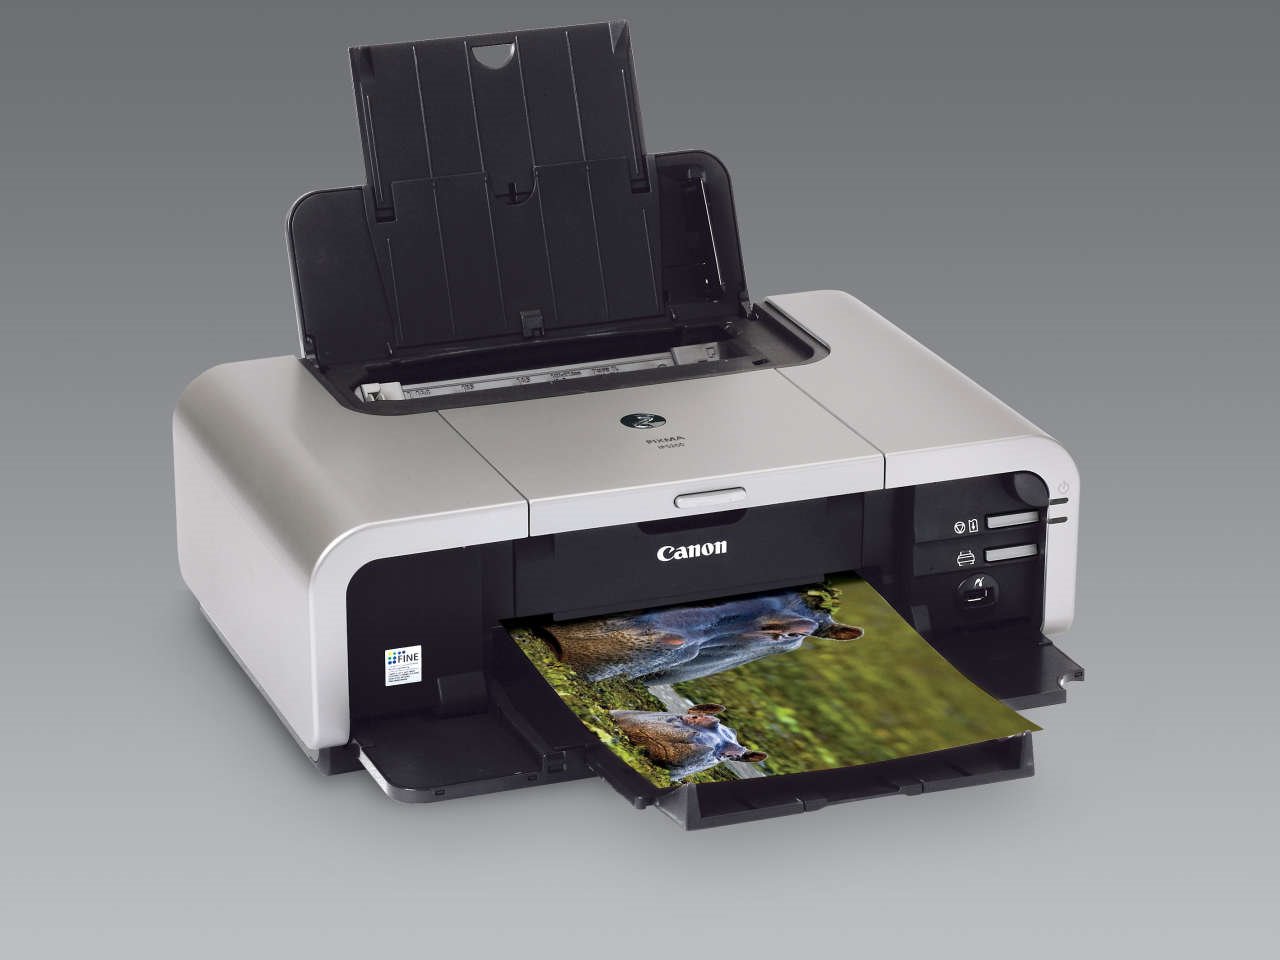 how much dpi is a canon mp490 printer